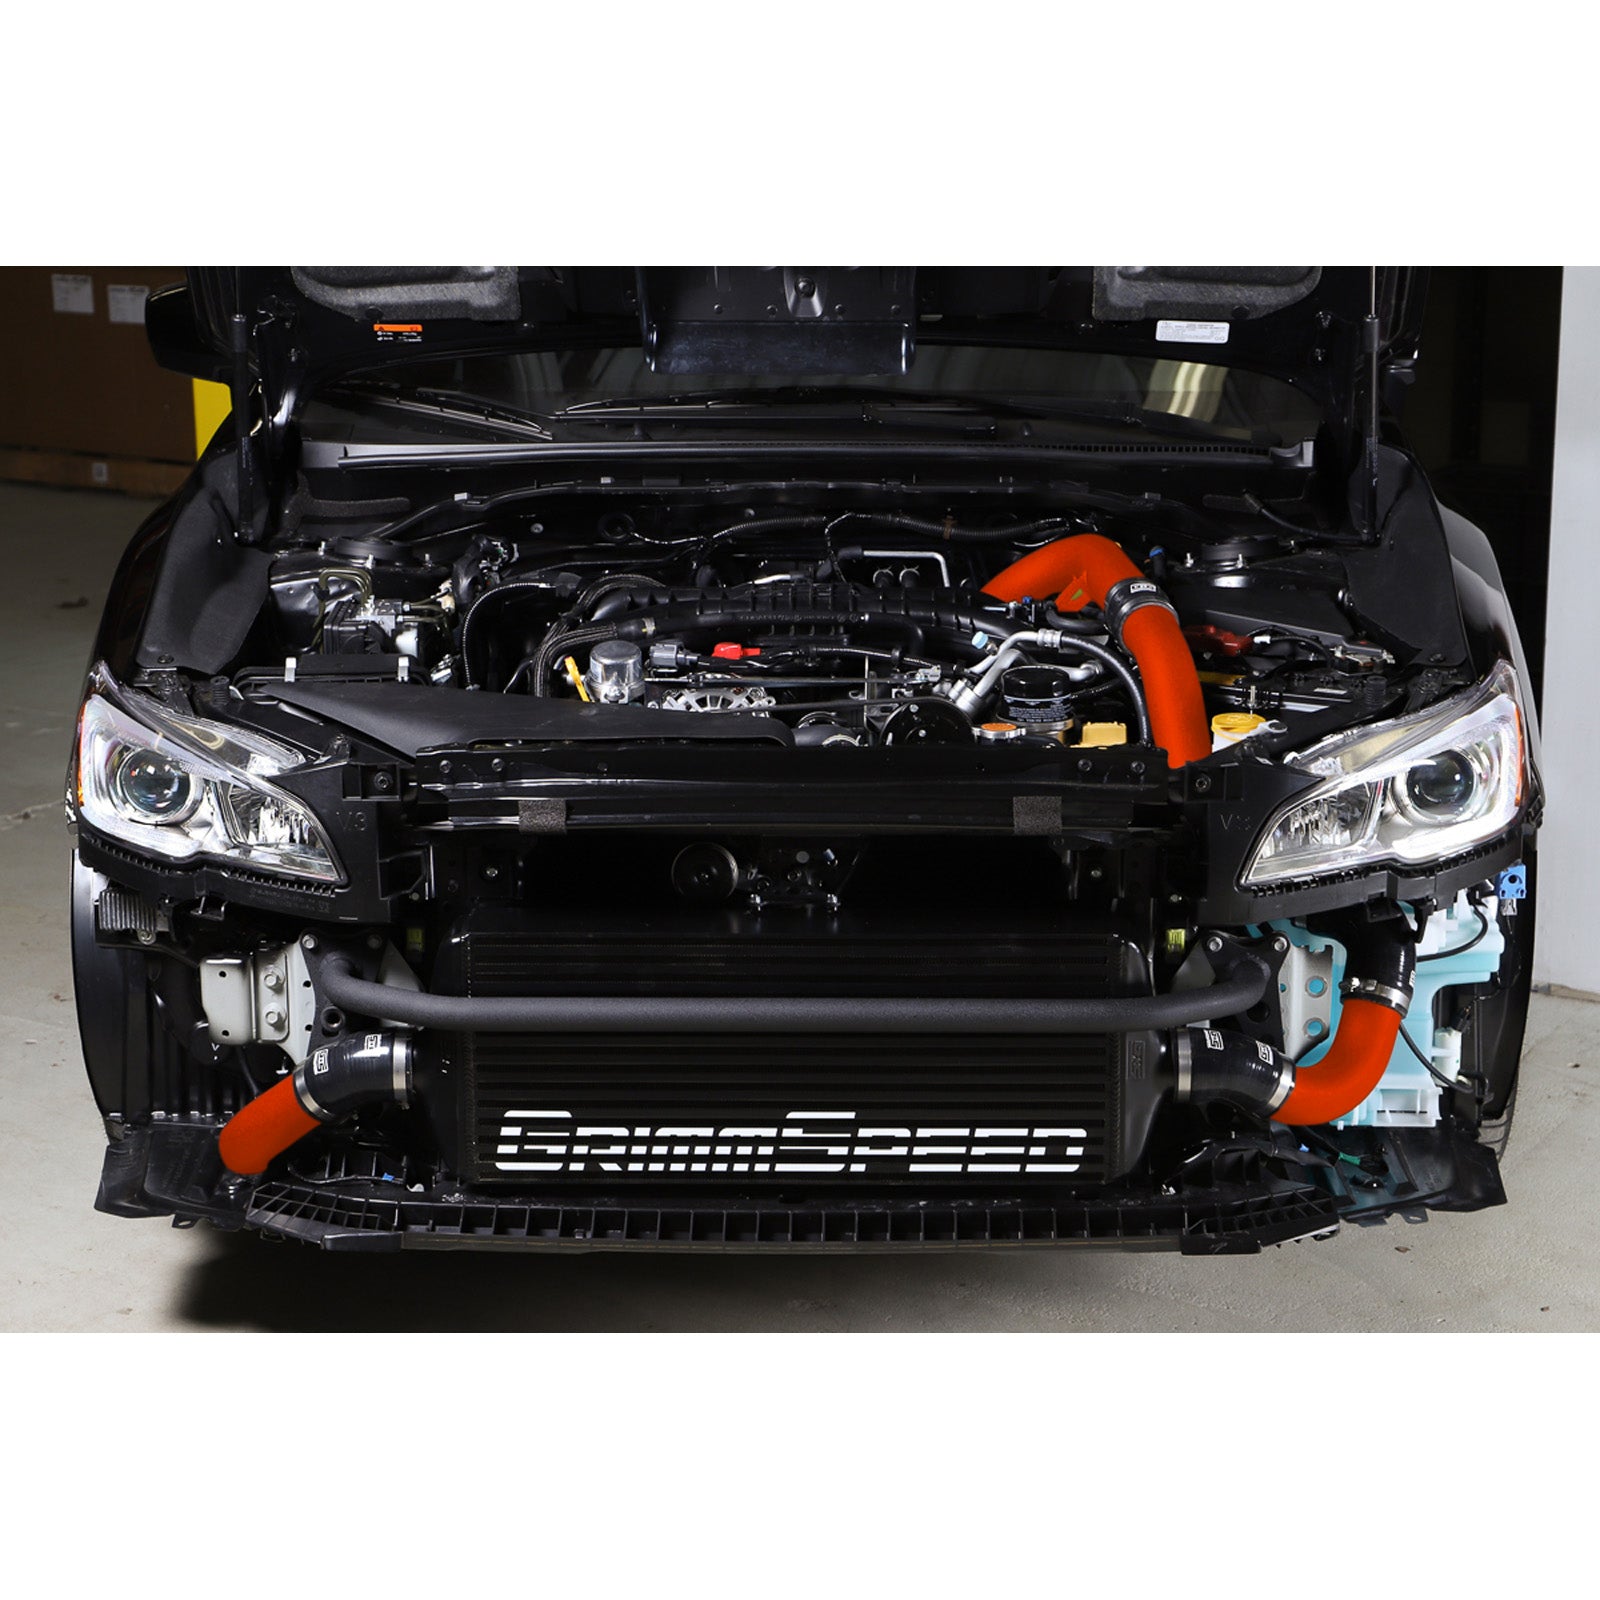 GrimmSpeed Front Mount Intercooler Kit - Black Core with Red Piping - 2015-21 Subaru WRX